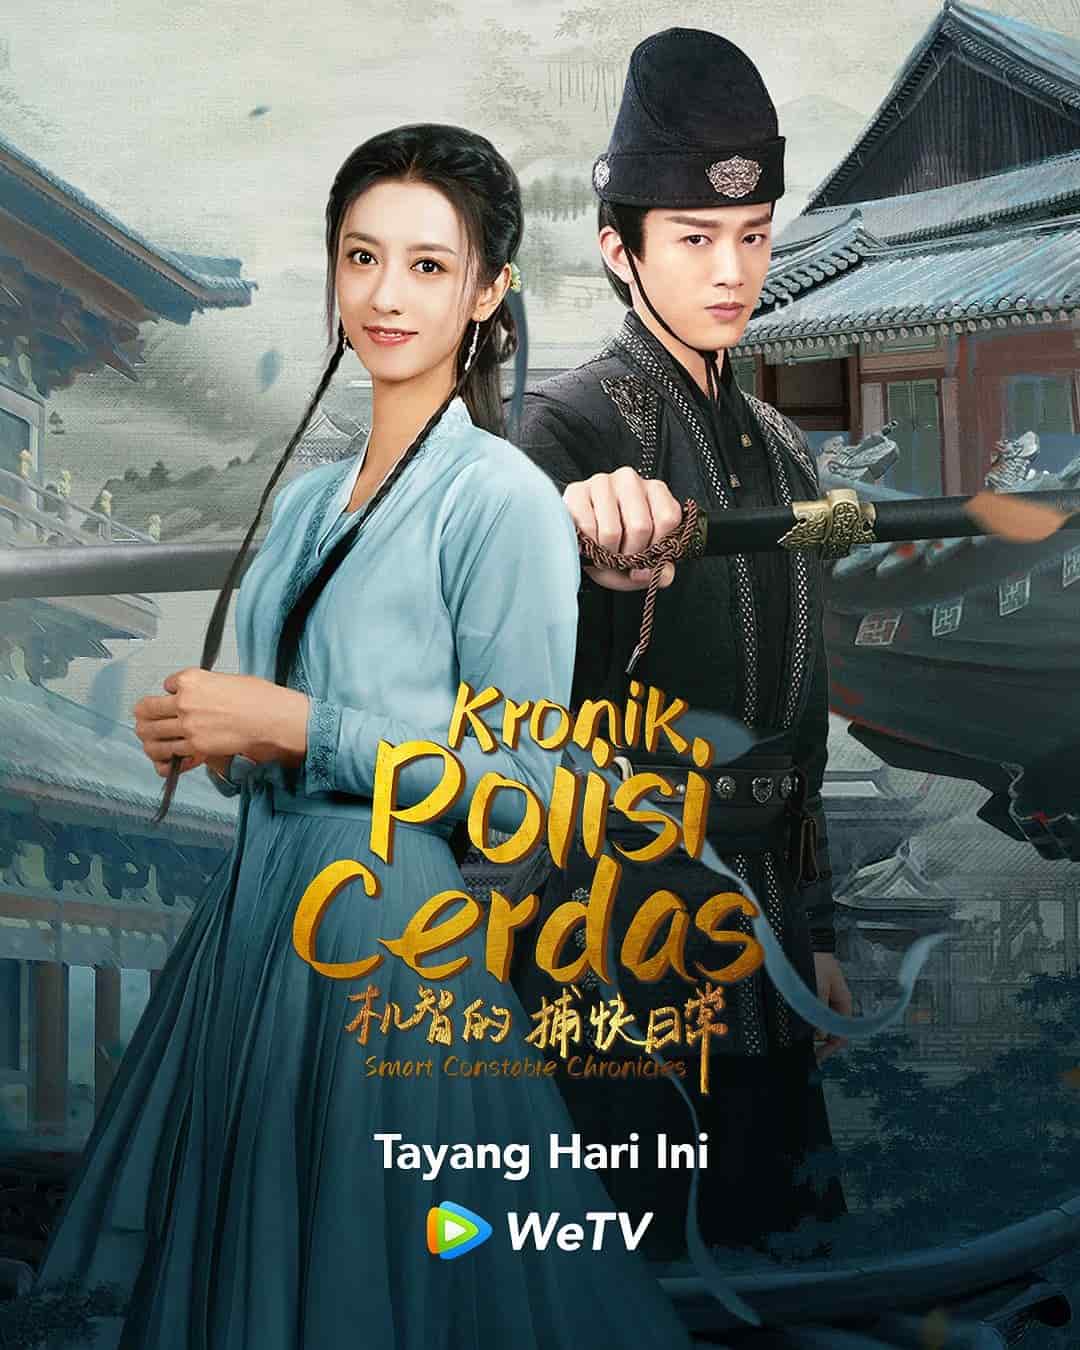 Smart Constable Chronicles - Sinopsis, Pemain, OST, Episode, Review